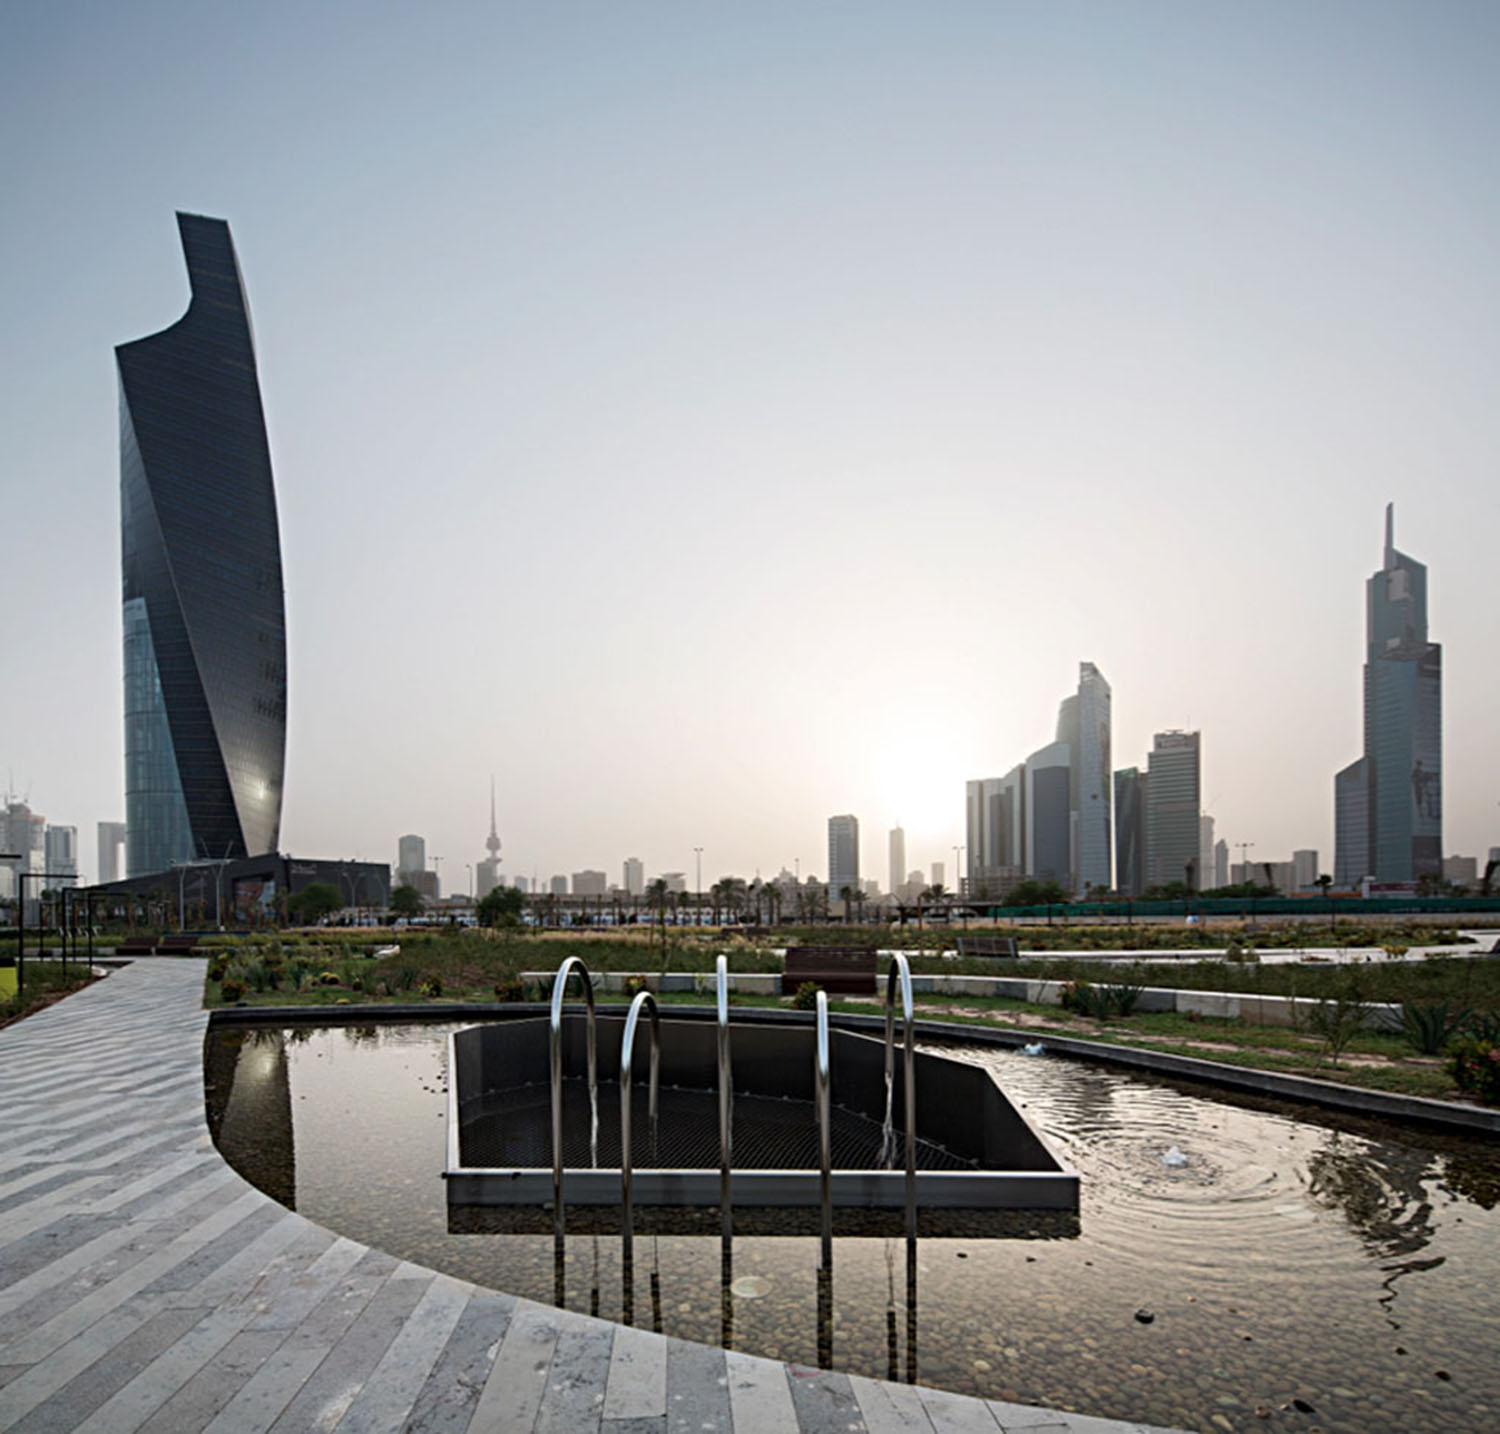 Al Shaheed Park - The old Park’s dominant elements, the fountain and amphitheatre, were replaced by a 12,000 m3 lake